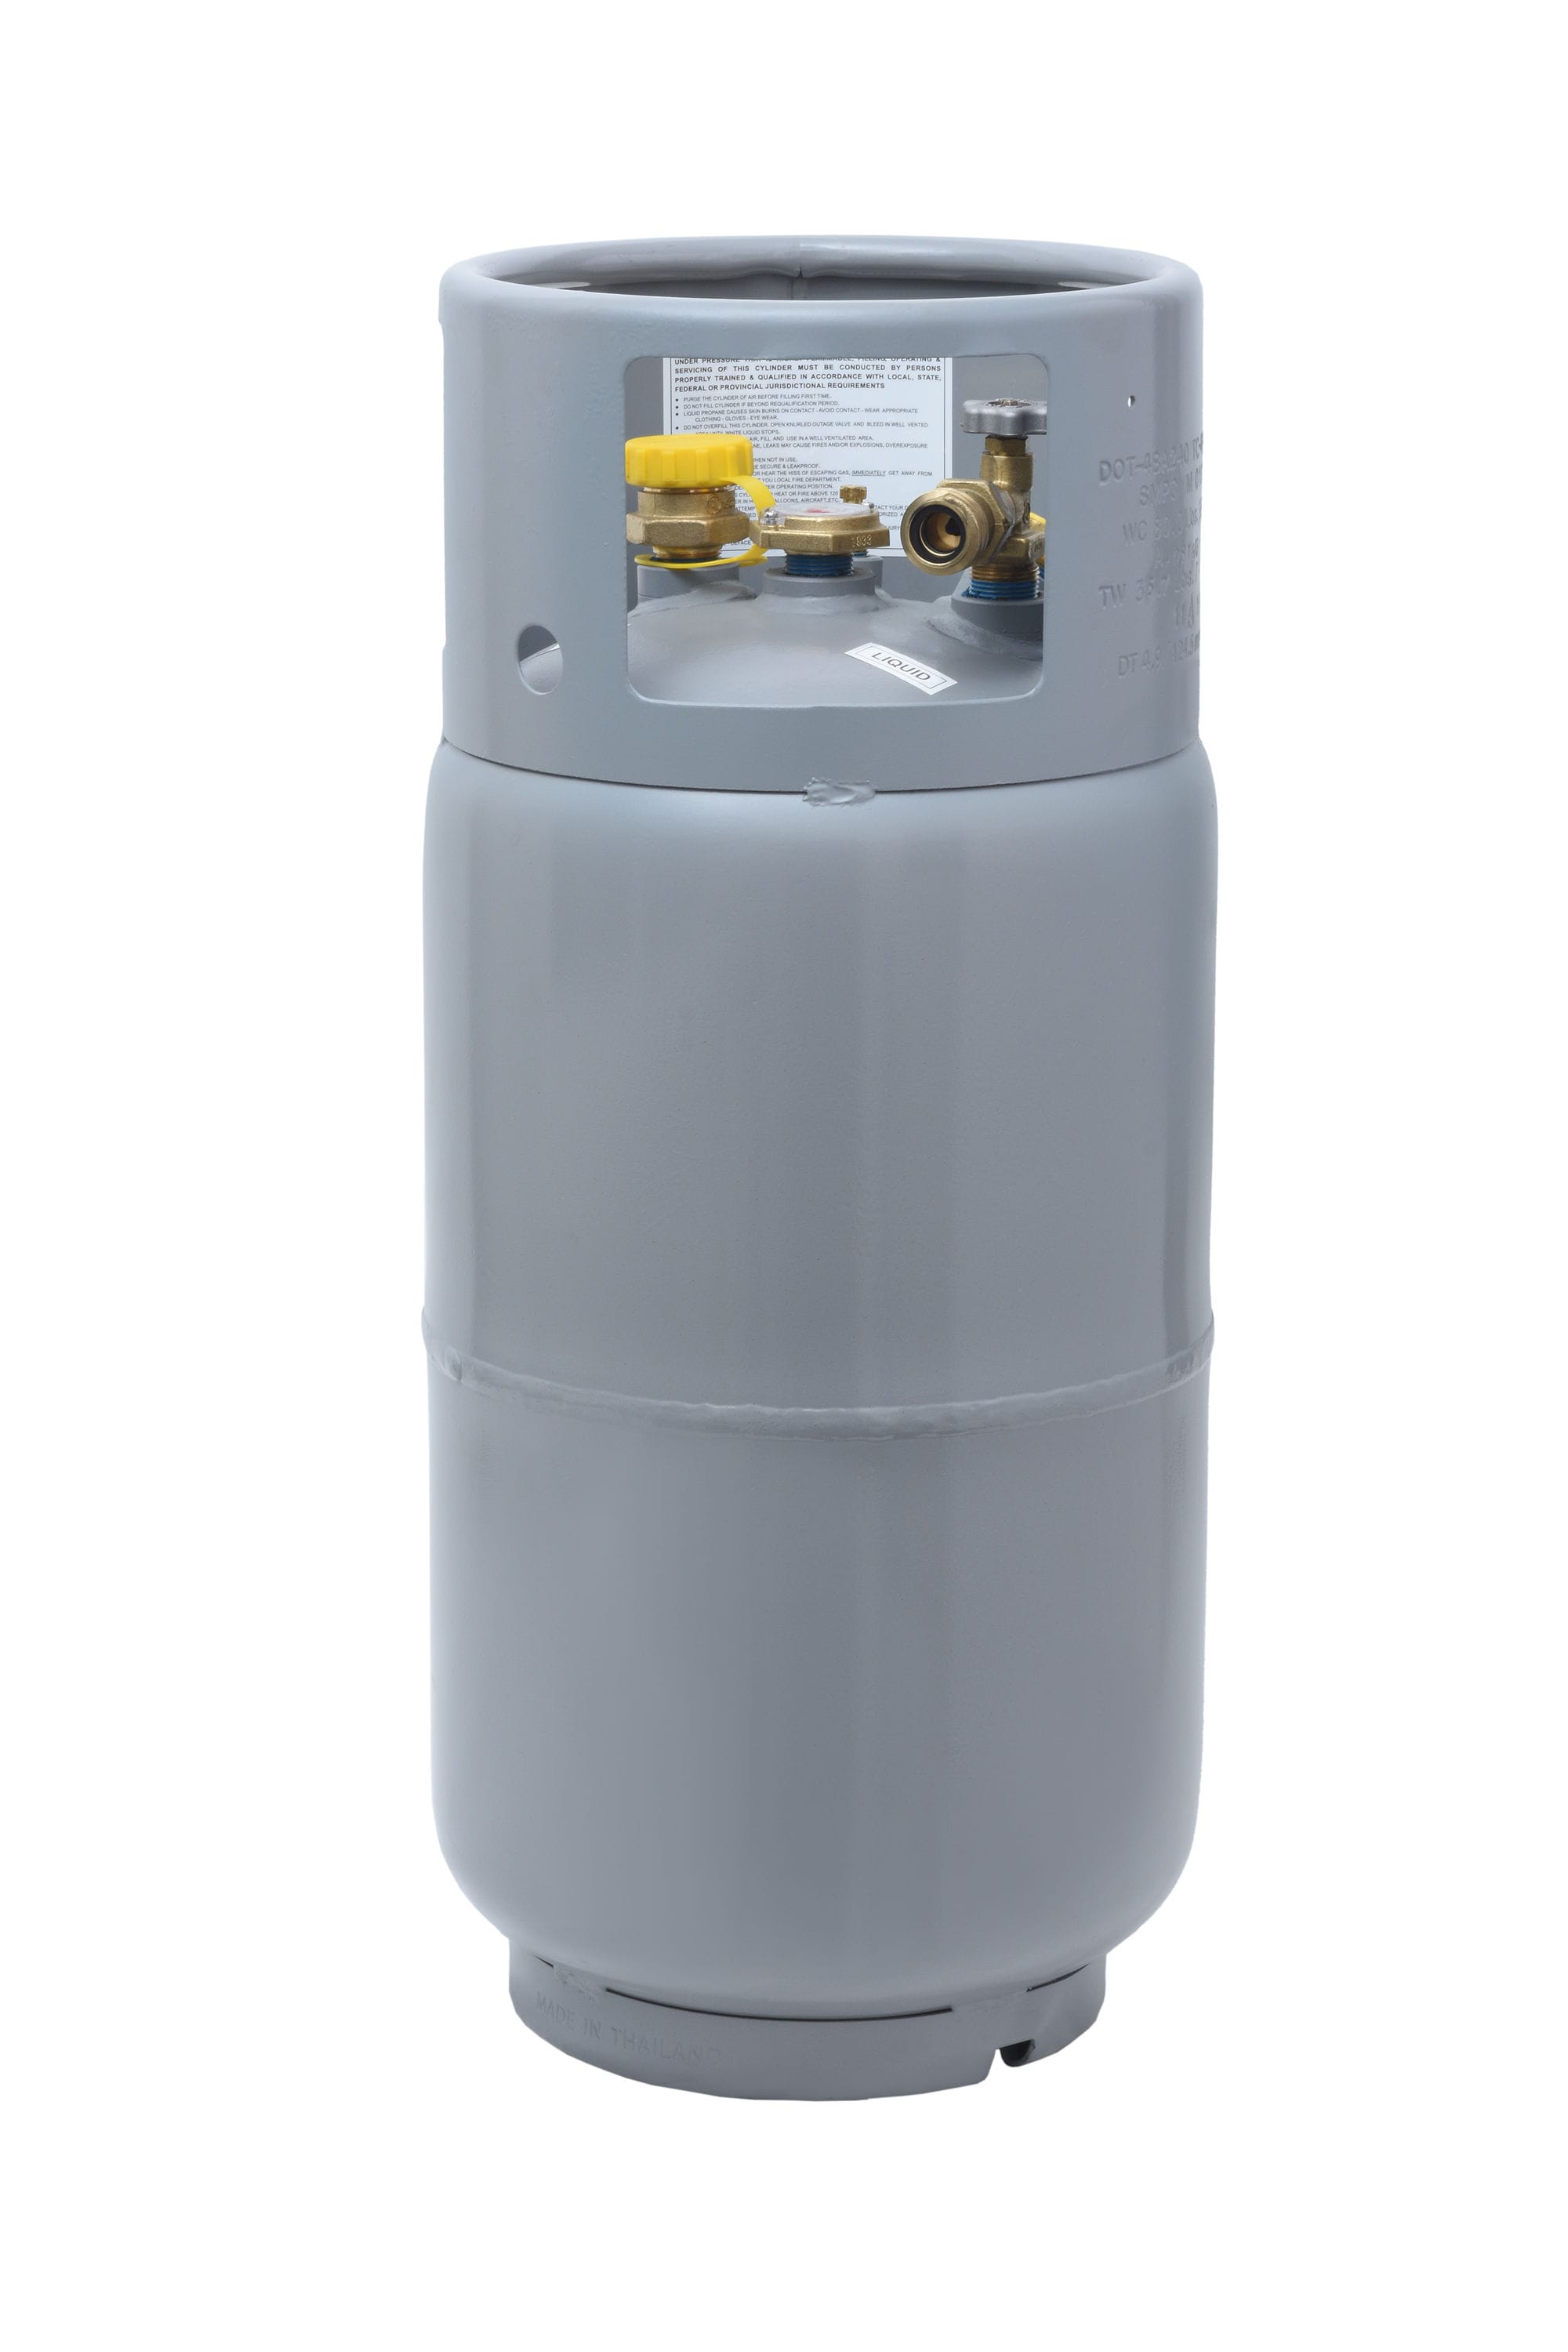 Flame King YSN330 30lb Steel Propane Tank Cylinder with Gauge and